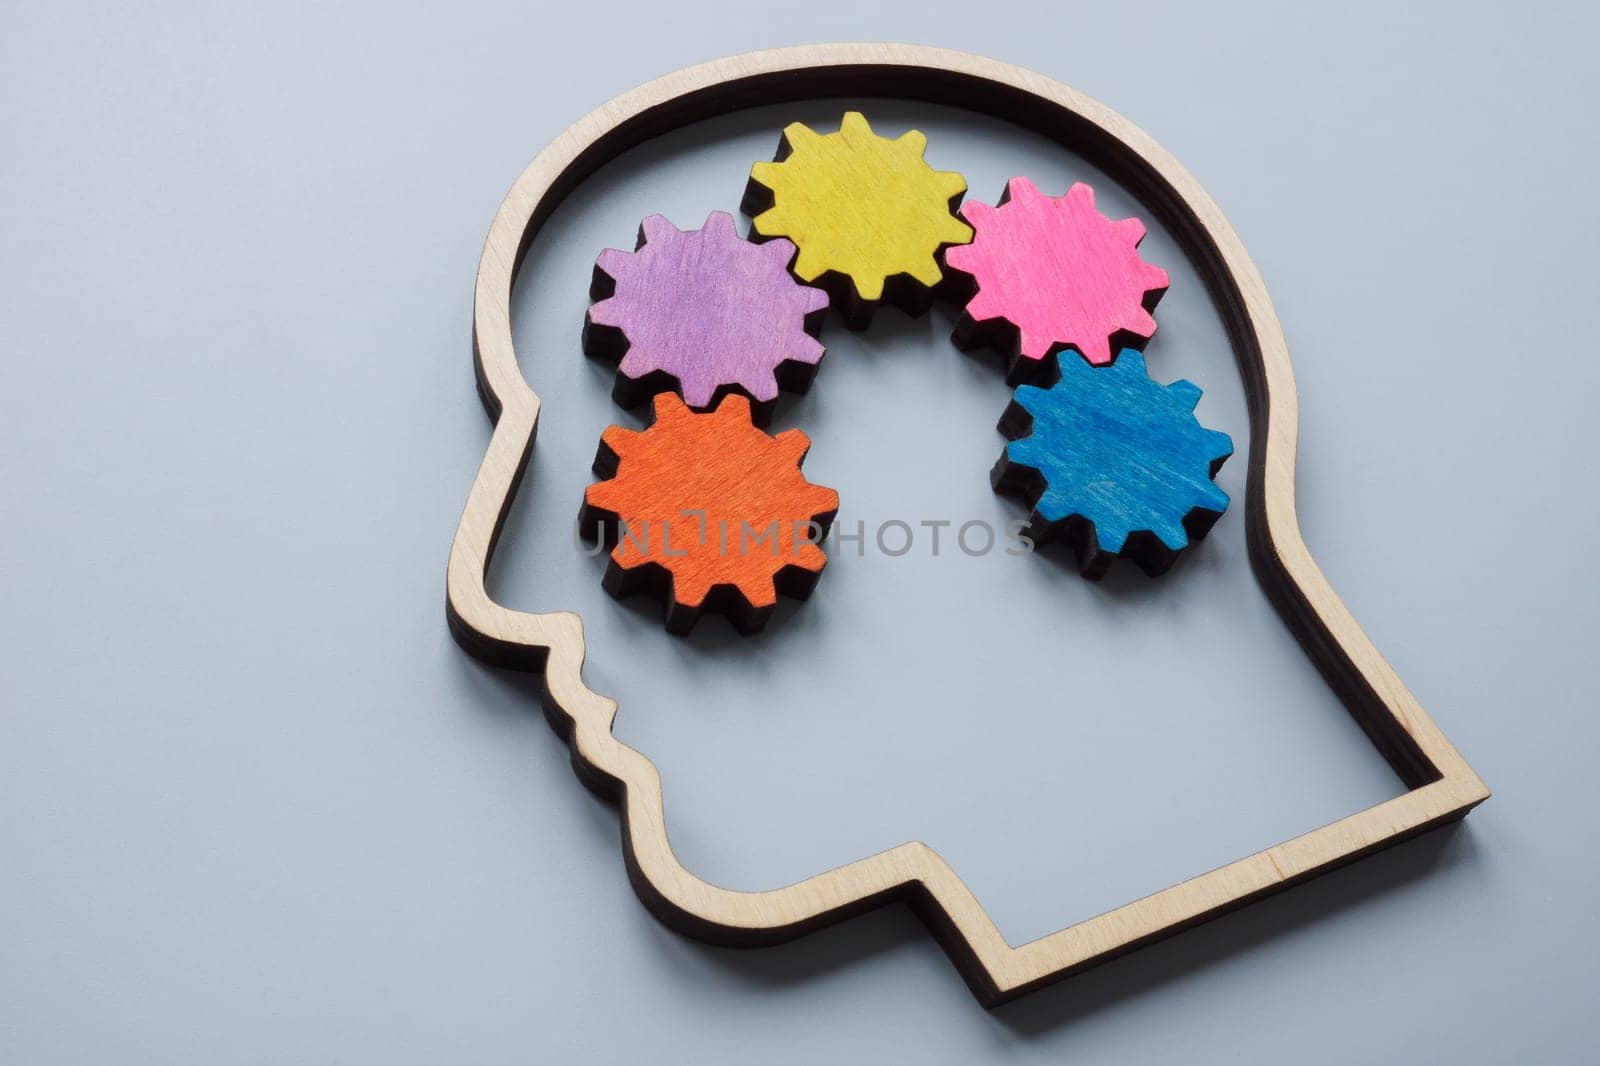 Head outline and colored gears as a concept for lateral thinking, creativity and neurodiversity. by designer491